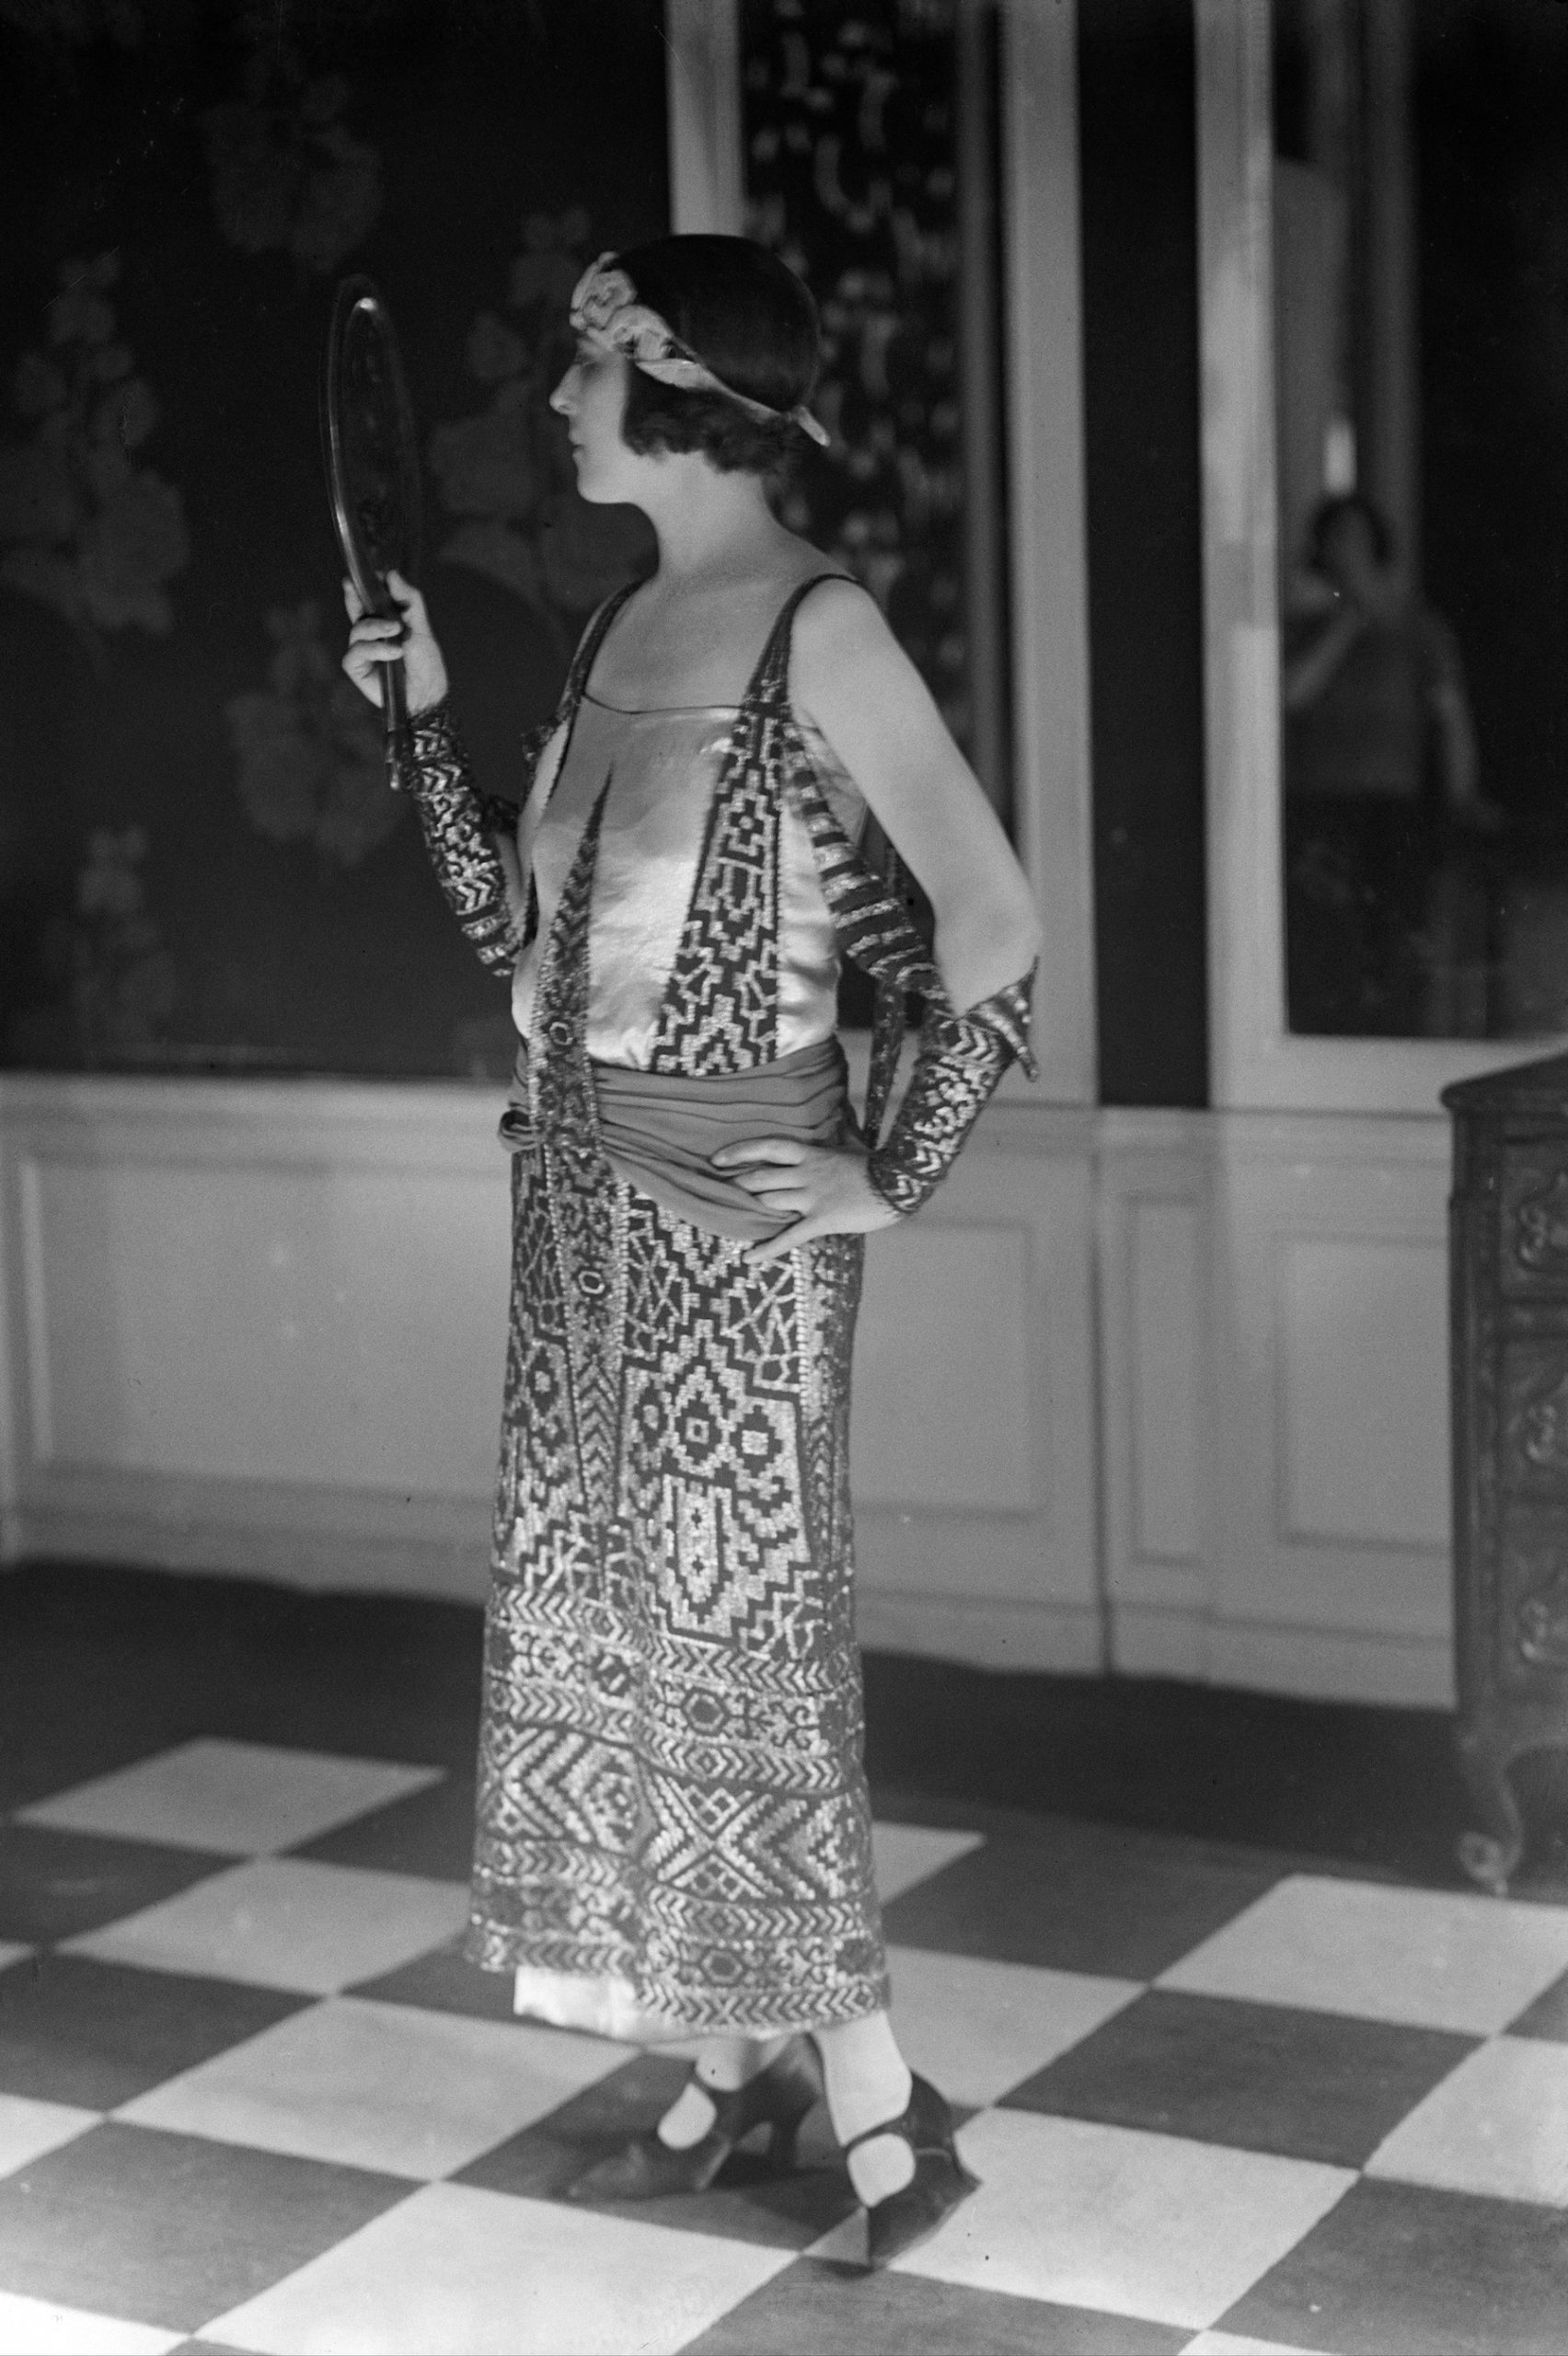 A woman facing away from the camera and looking into a mirror with bobbed hair wearing a ankle length dress with Egyptian-style motifs by Paul Poiret, 1923